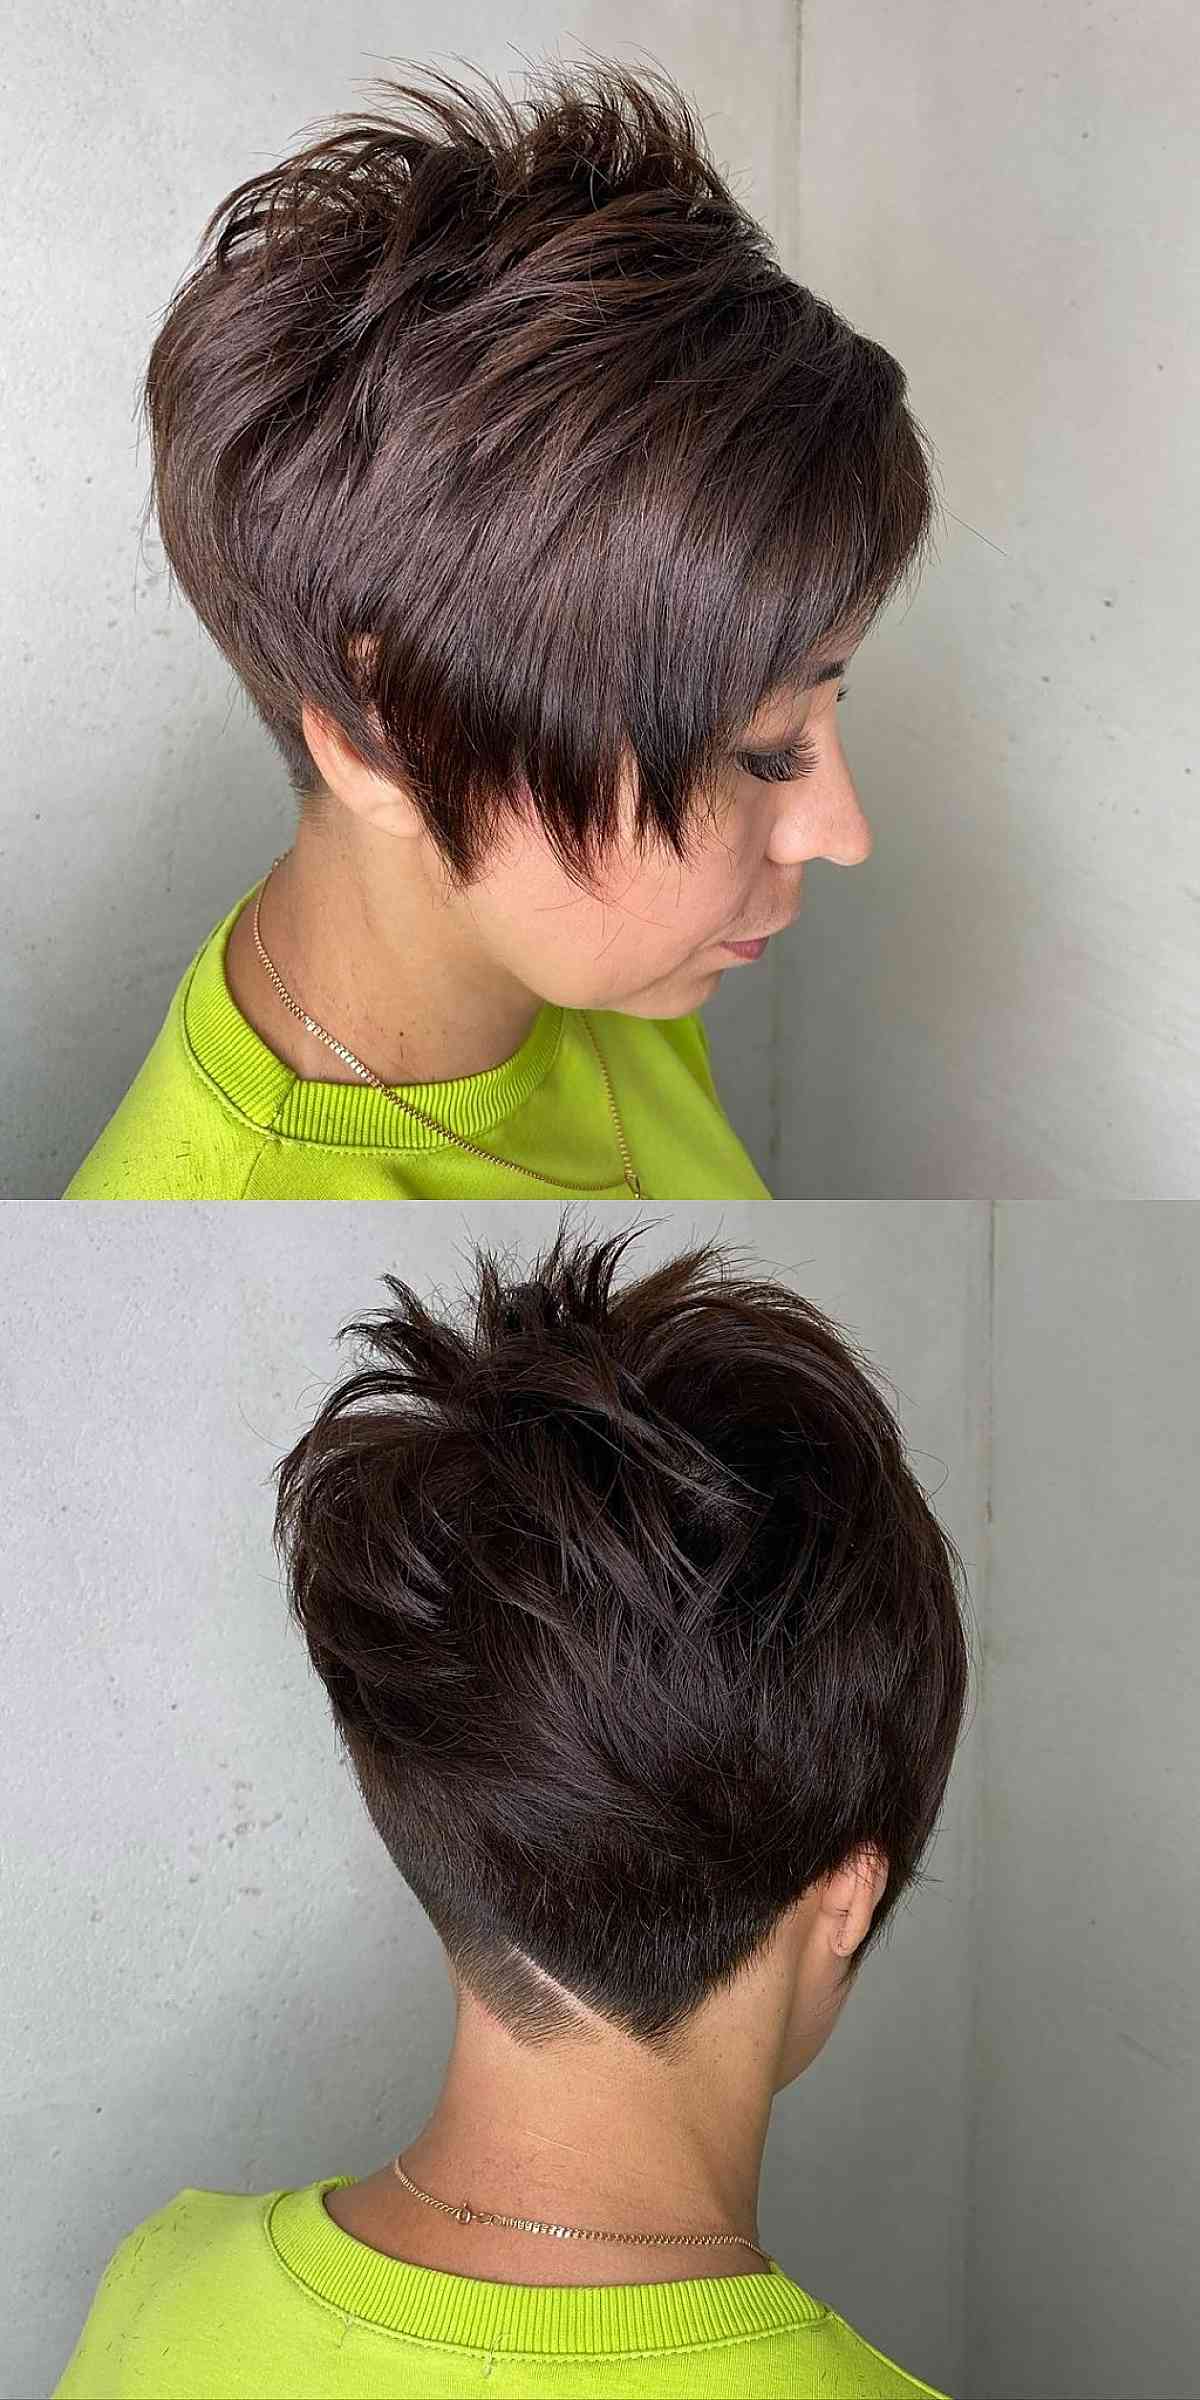 Spiked pixie undercut for thick hair